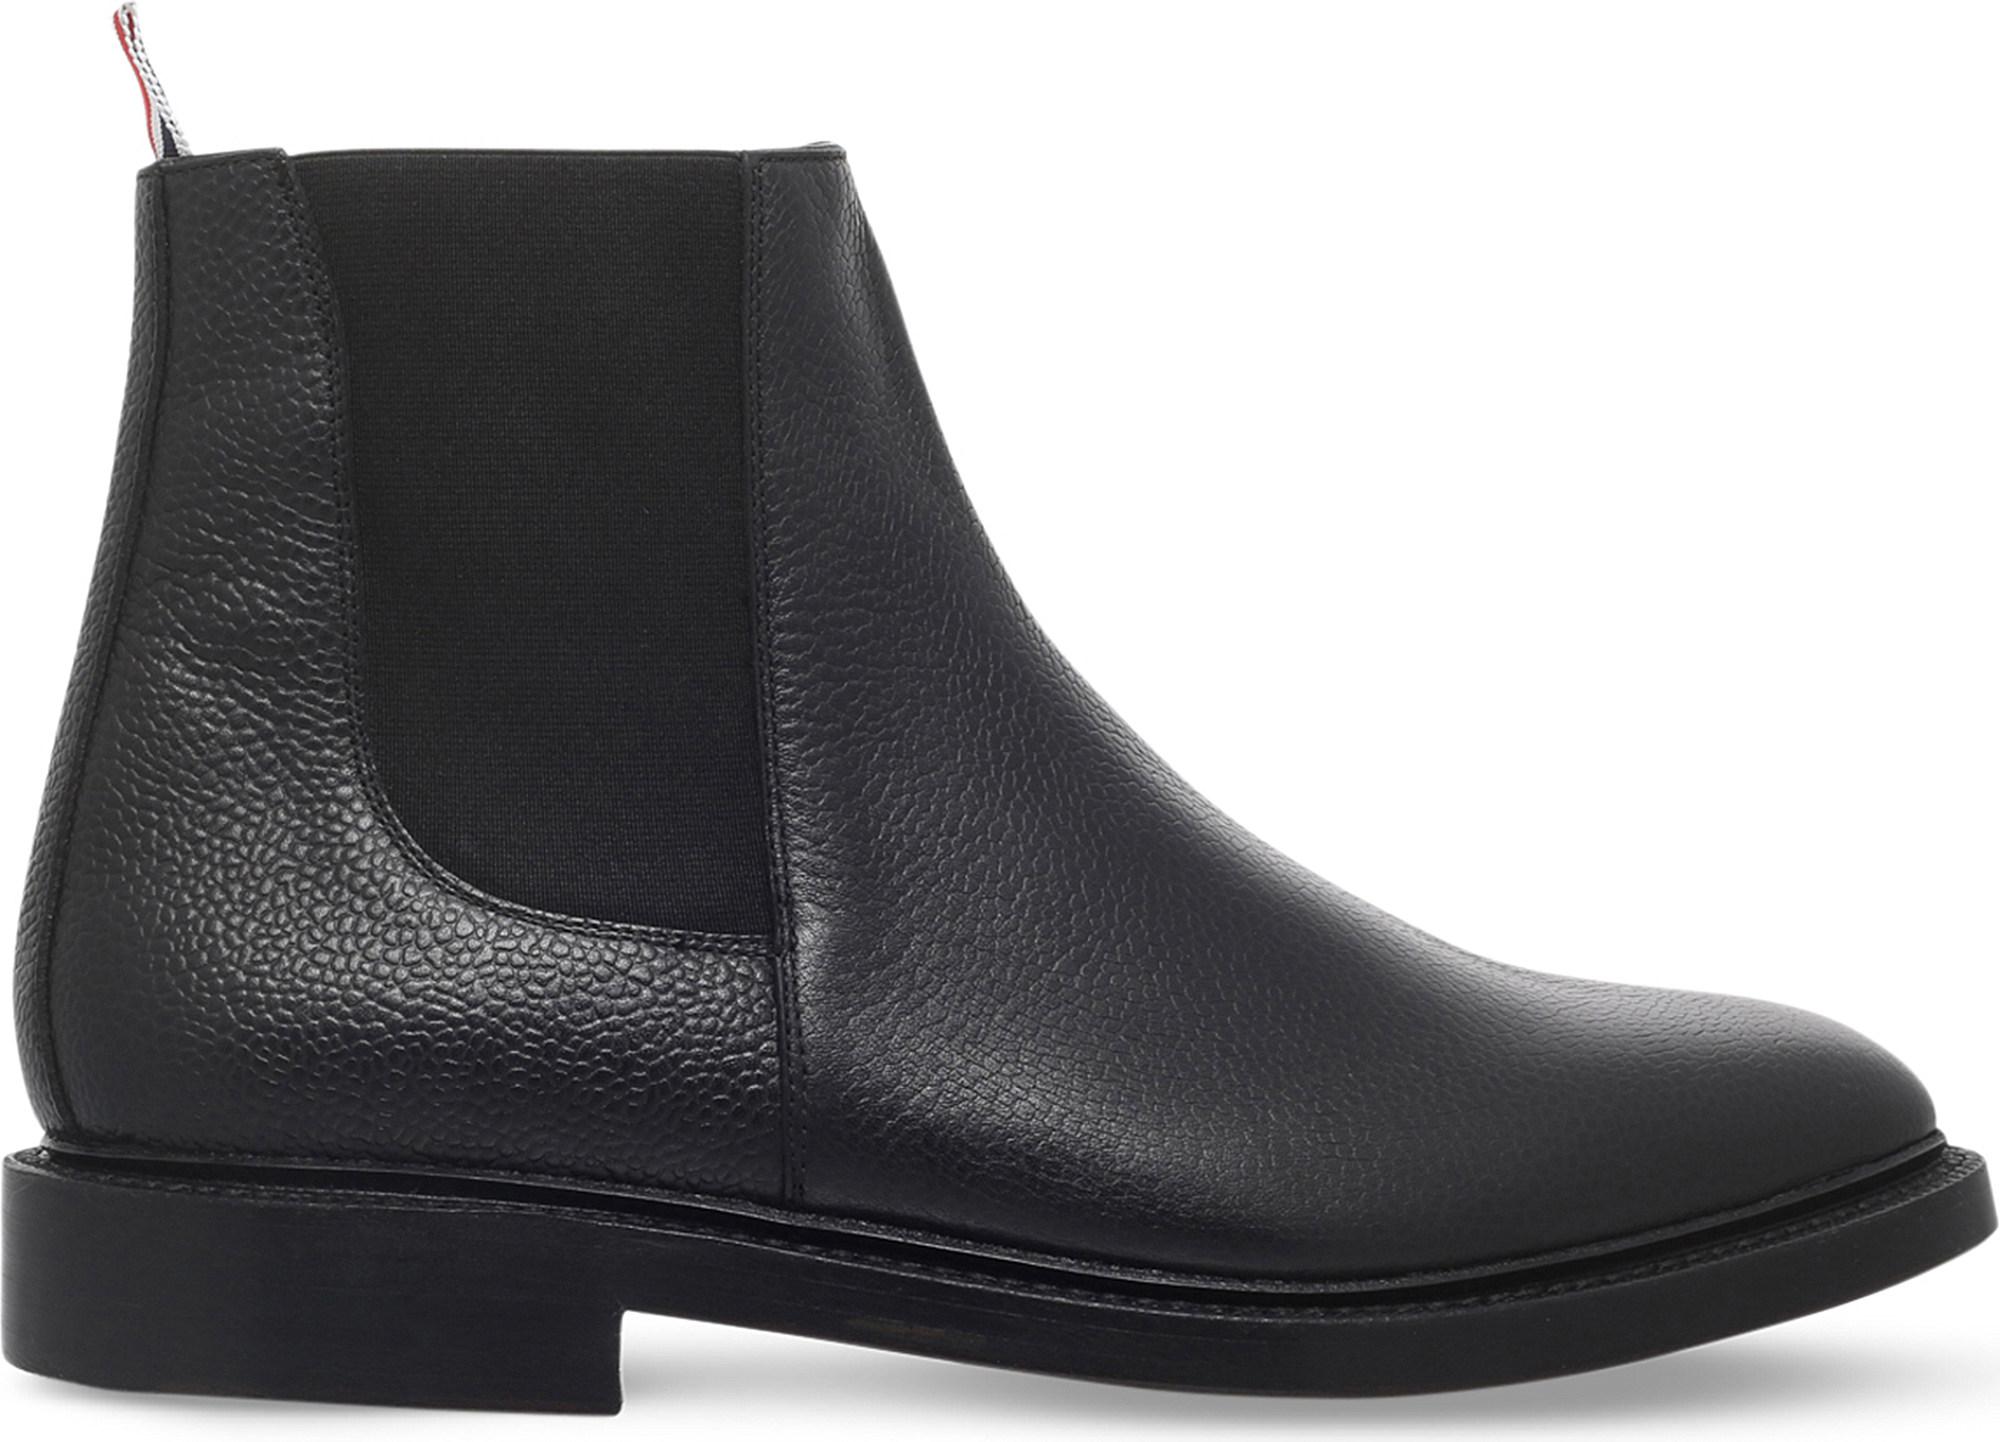 Lyst - Thom Browne Pebble-grain Leather Chelsea Boots in Black